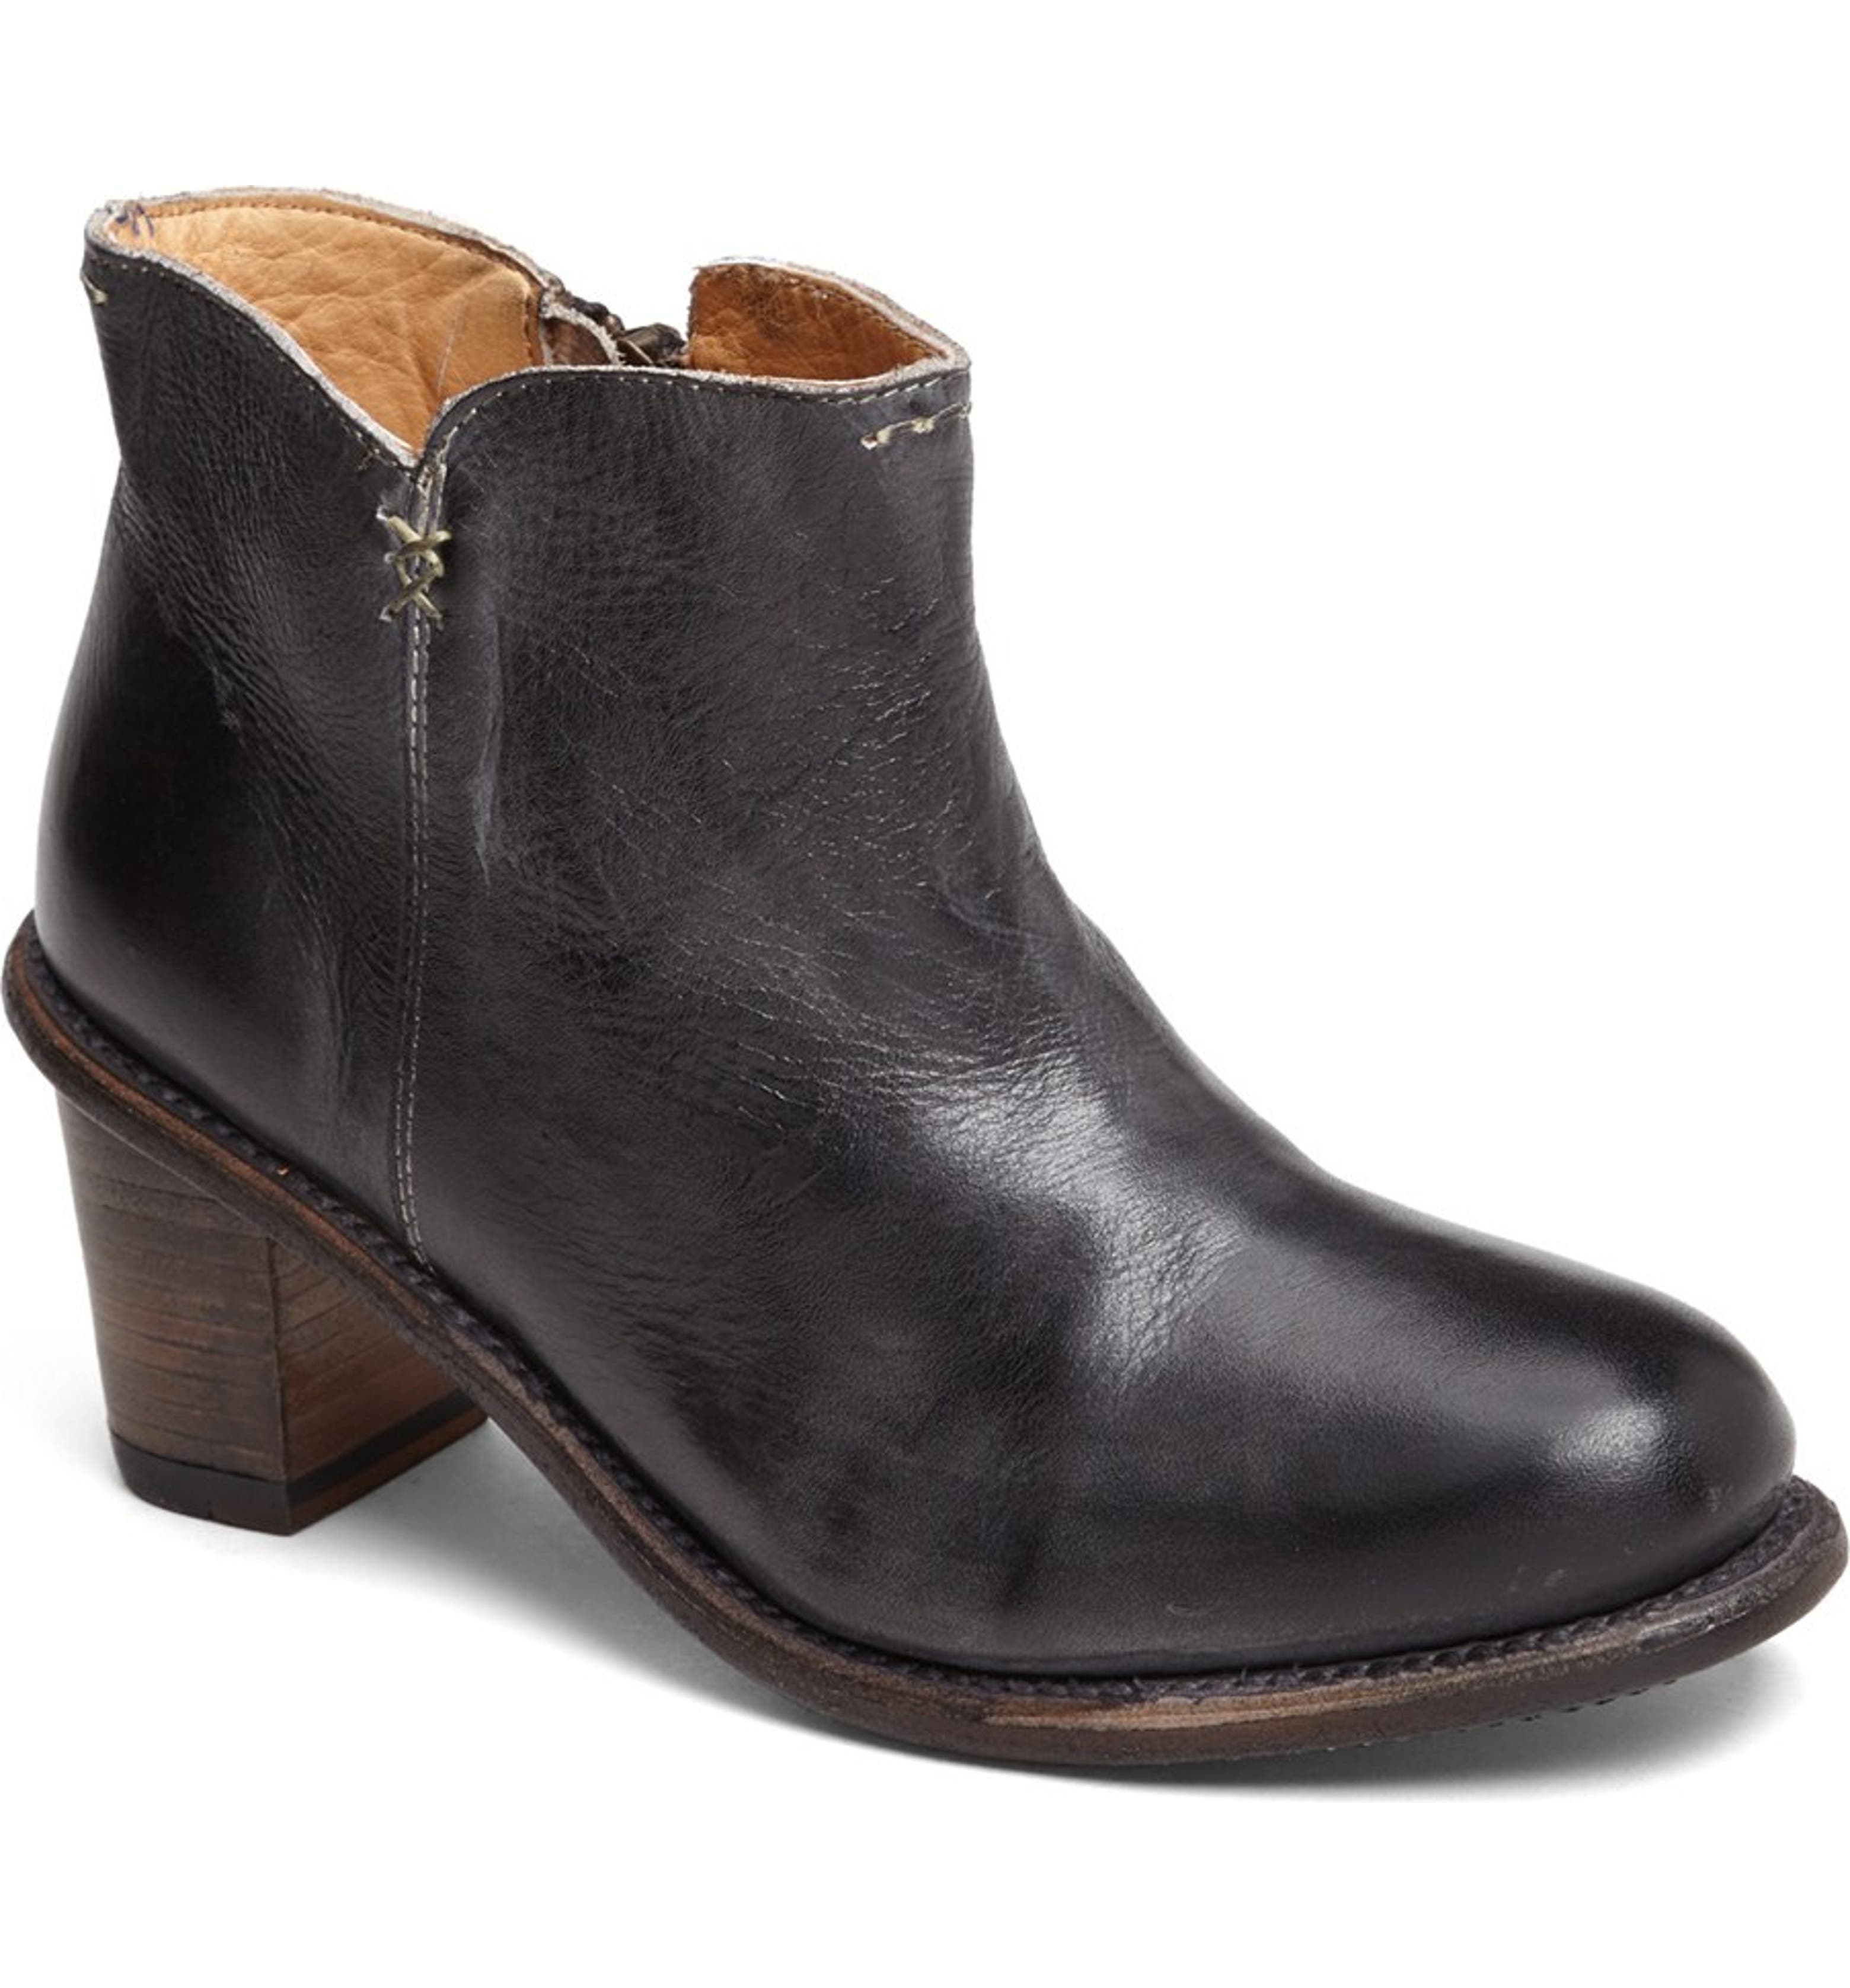 Bed Stu 'Sonic' Distressed Leather Bootie | Nordstrom